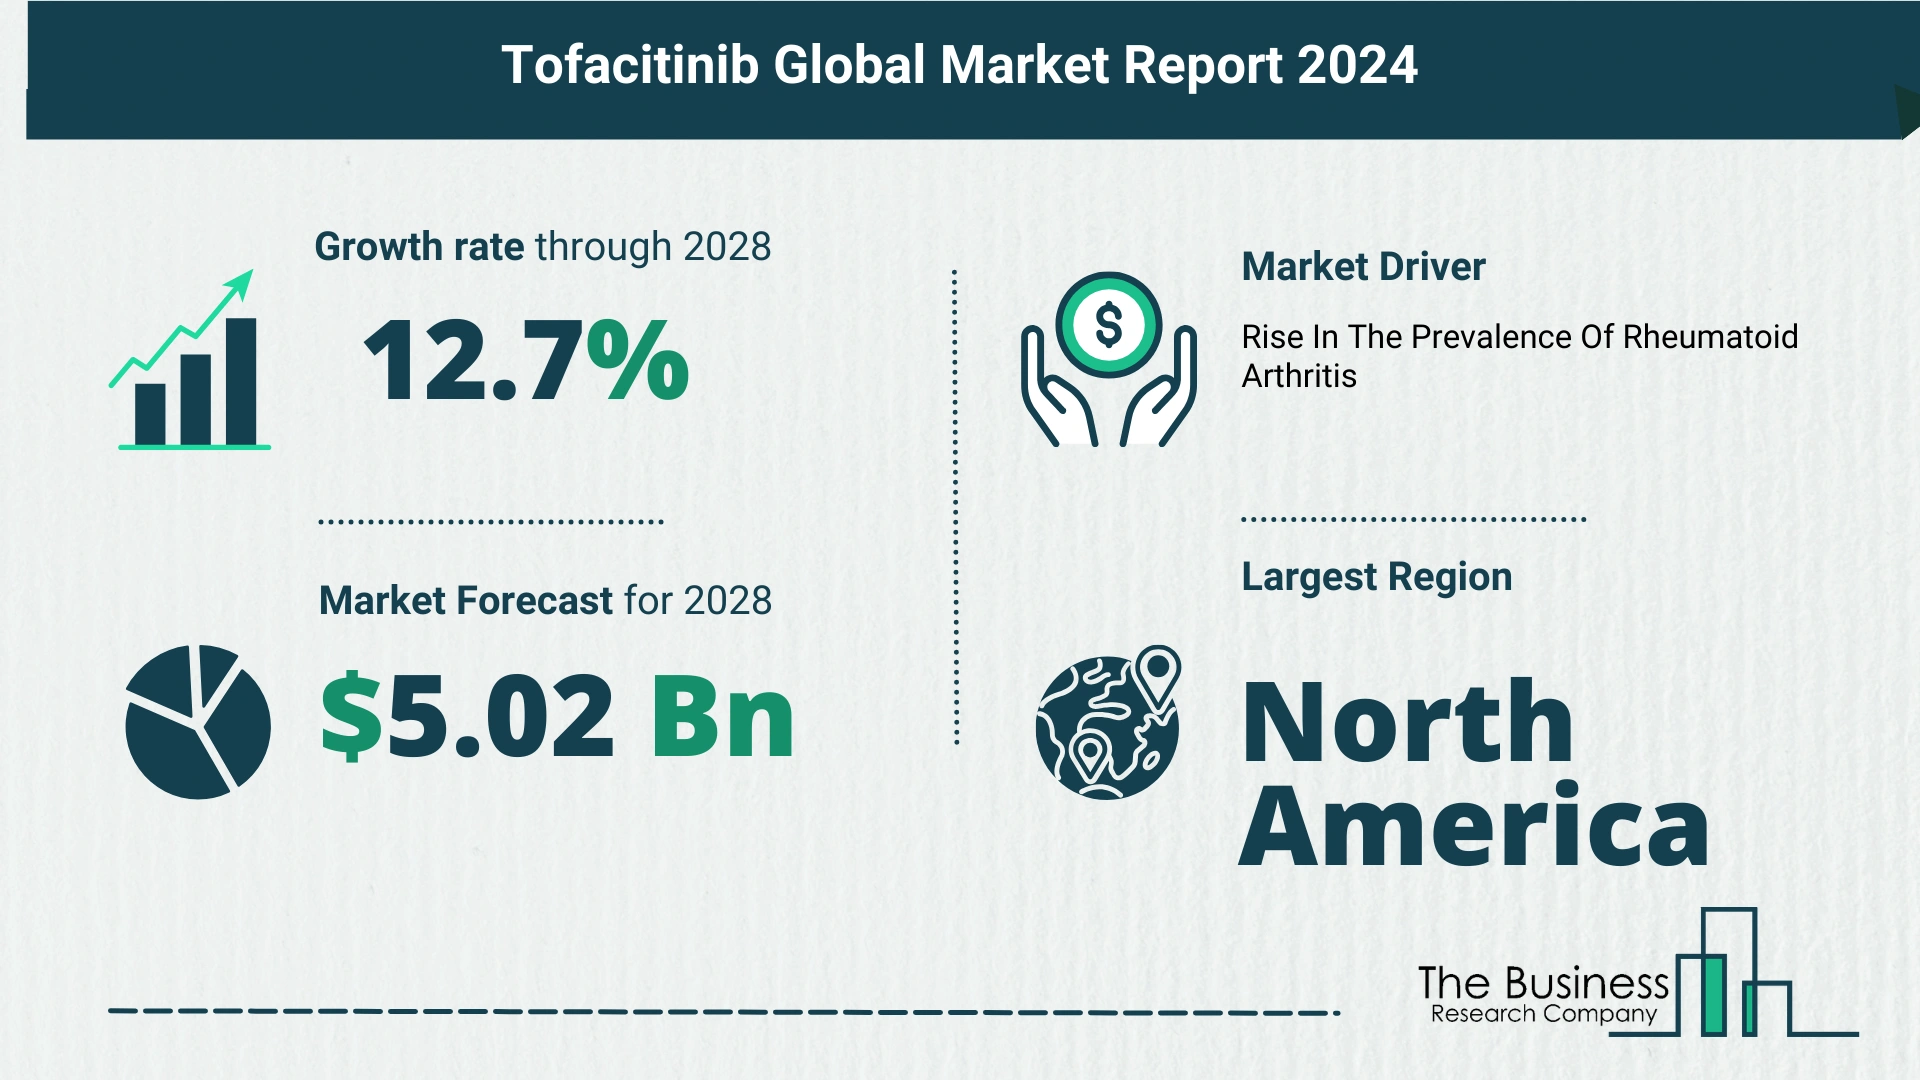 What Is The Forecast Growth Rate For The Tofacitinib Market?